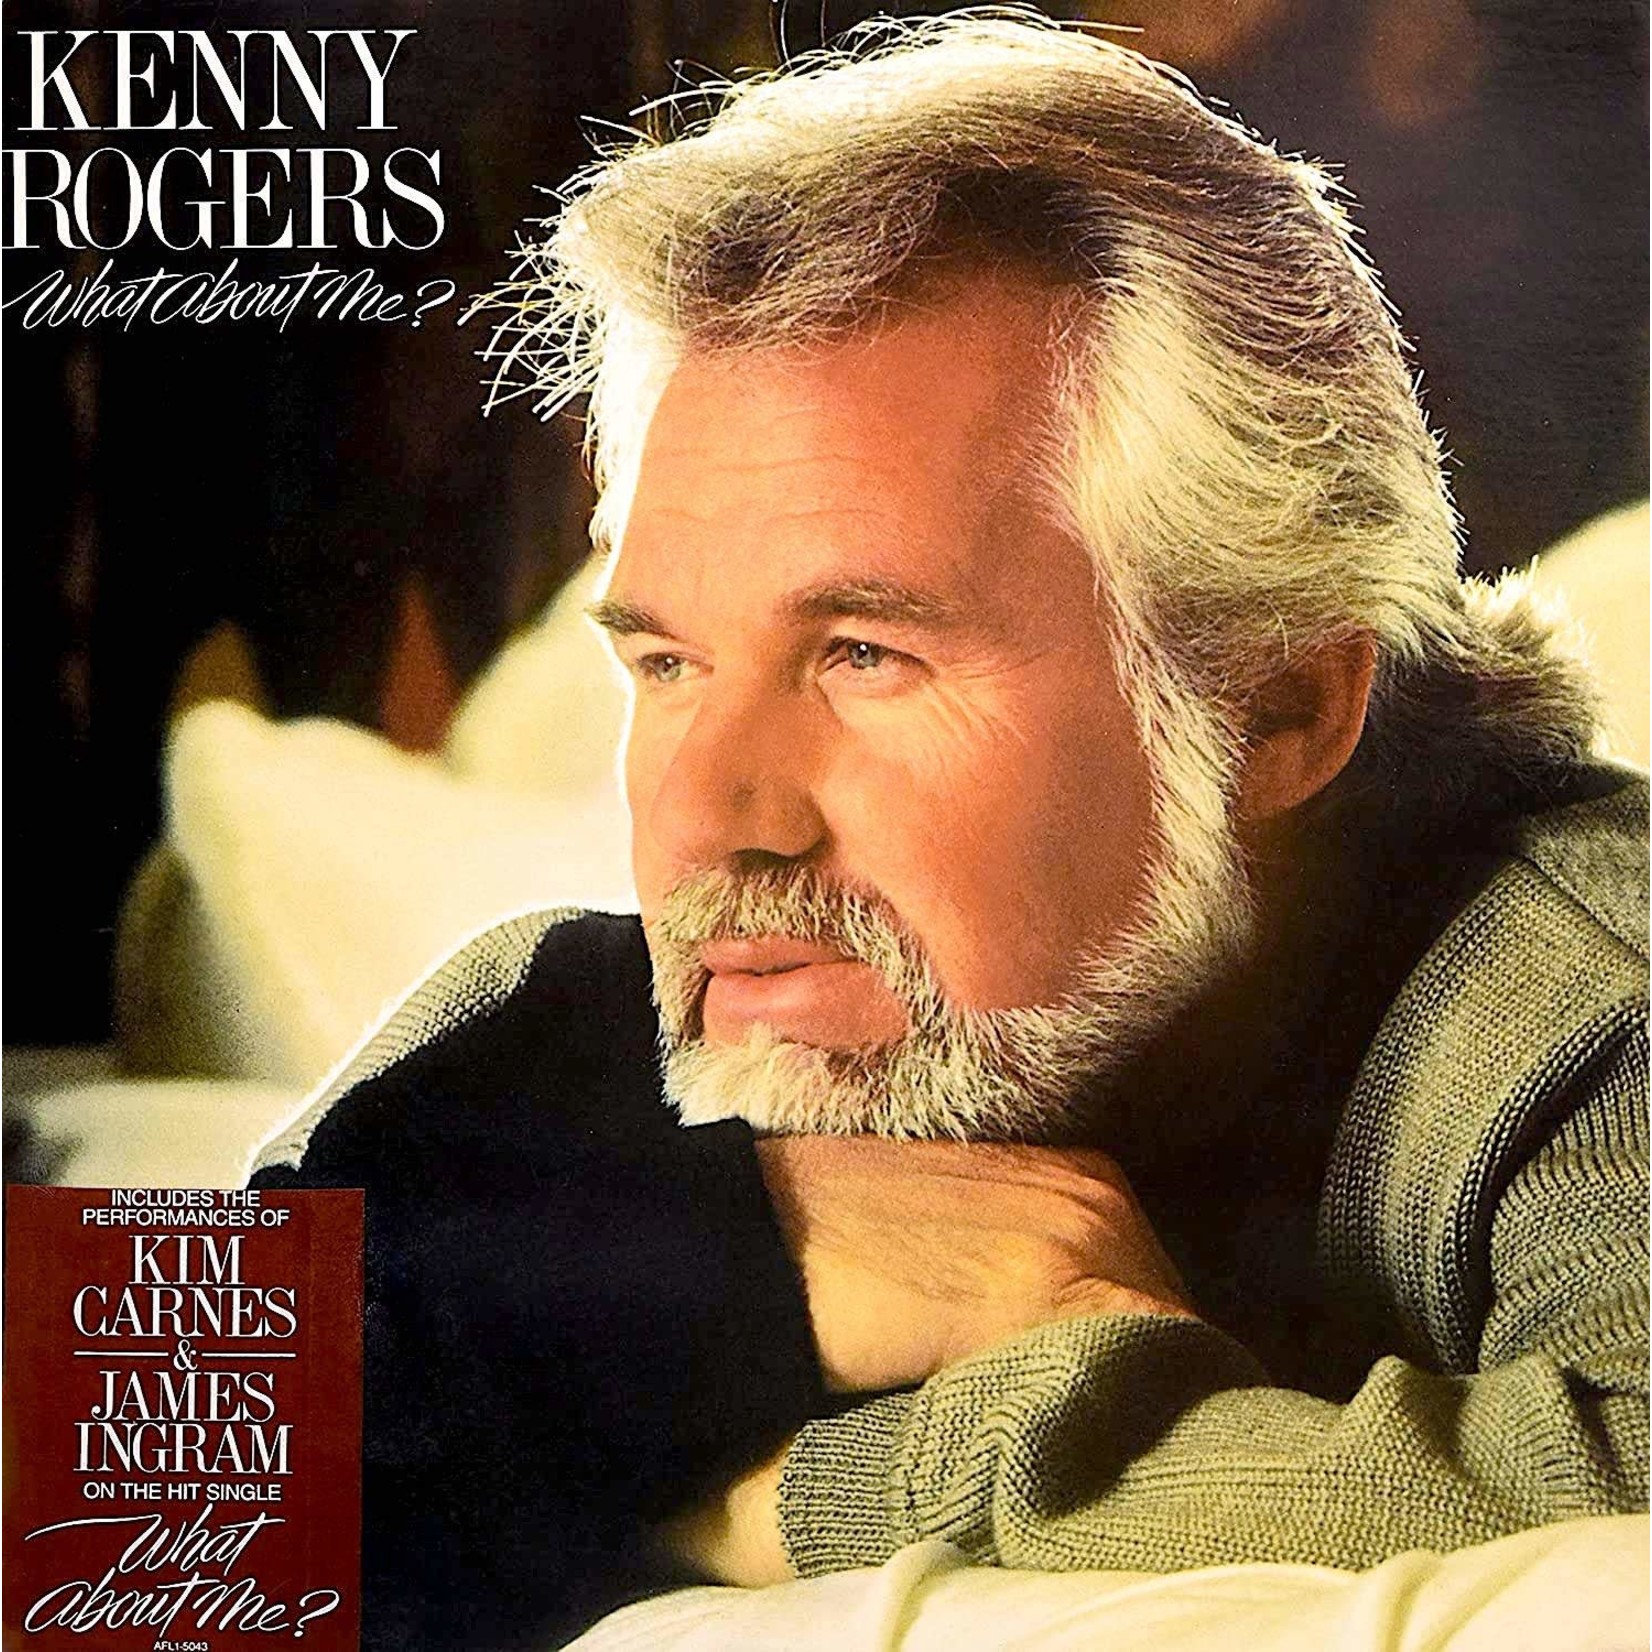 [Vintage] Kenny Rogers - What About Me?